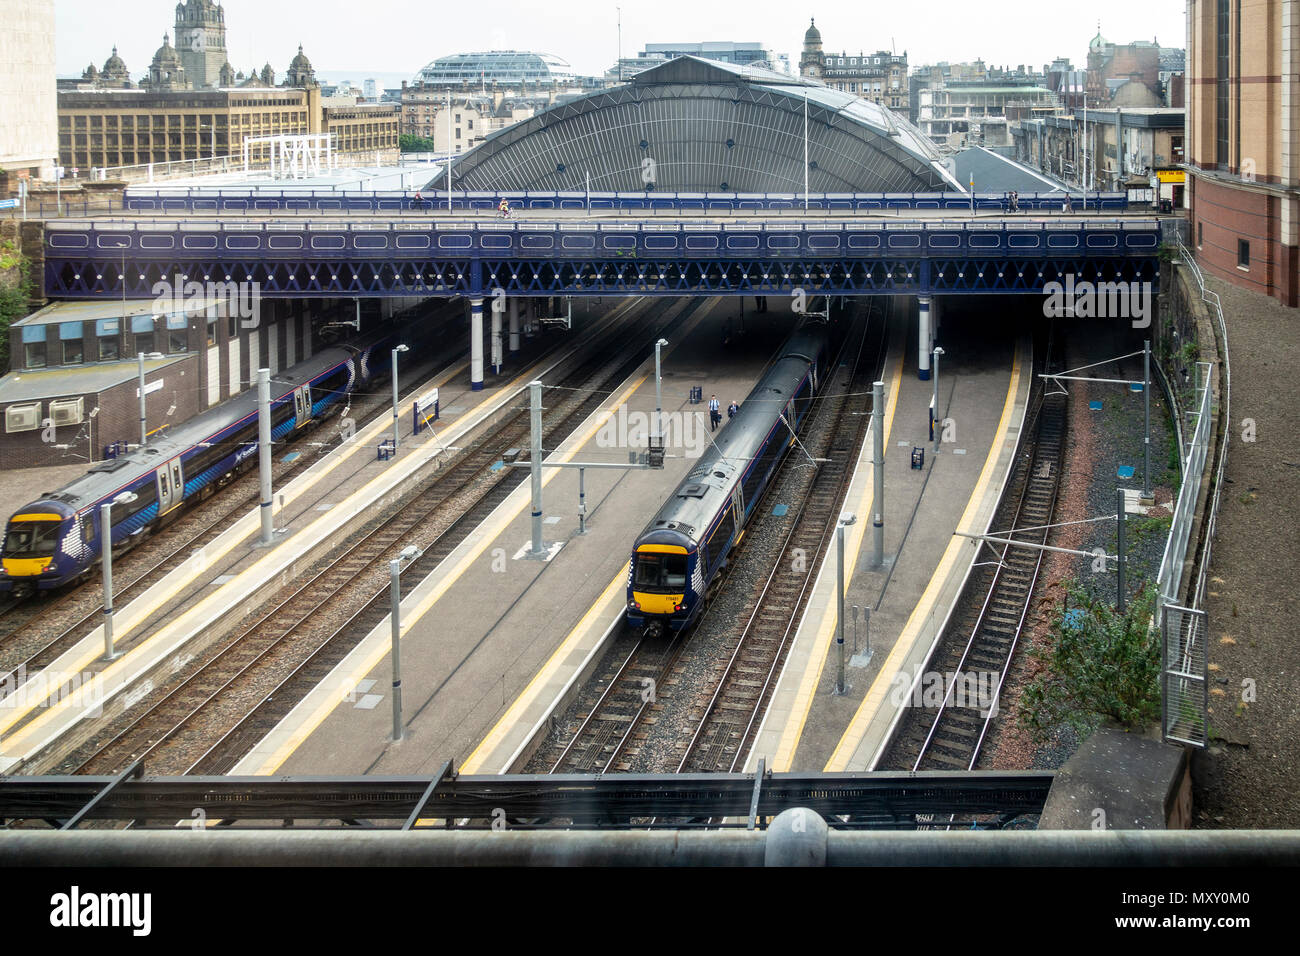 Two Scotrail trains in Queen Street Station, the second largest station in Glasgow, Scotland, in the city centre. Stock Photo